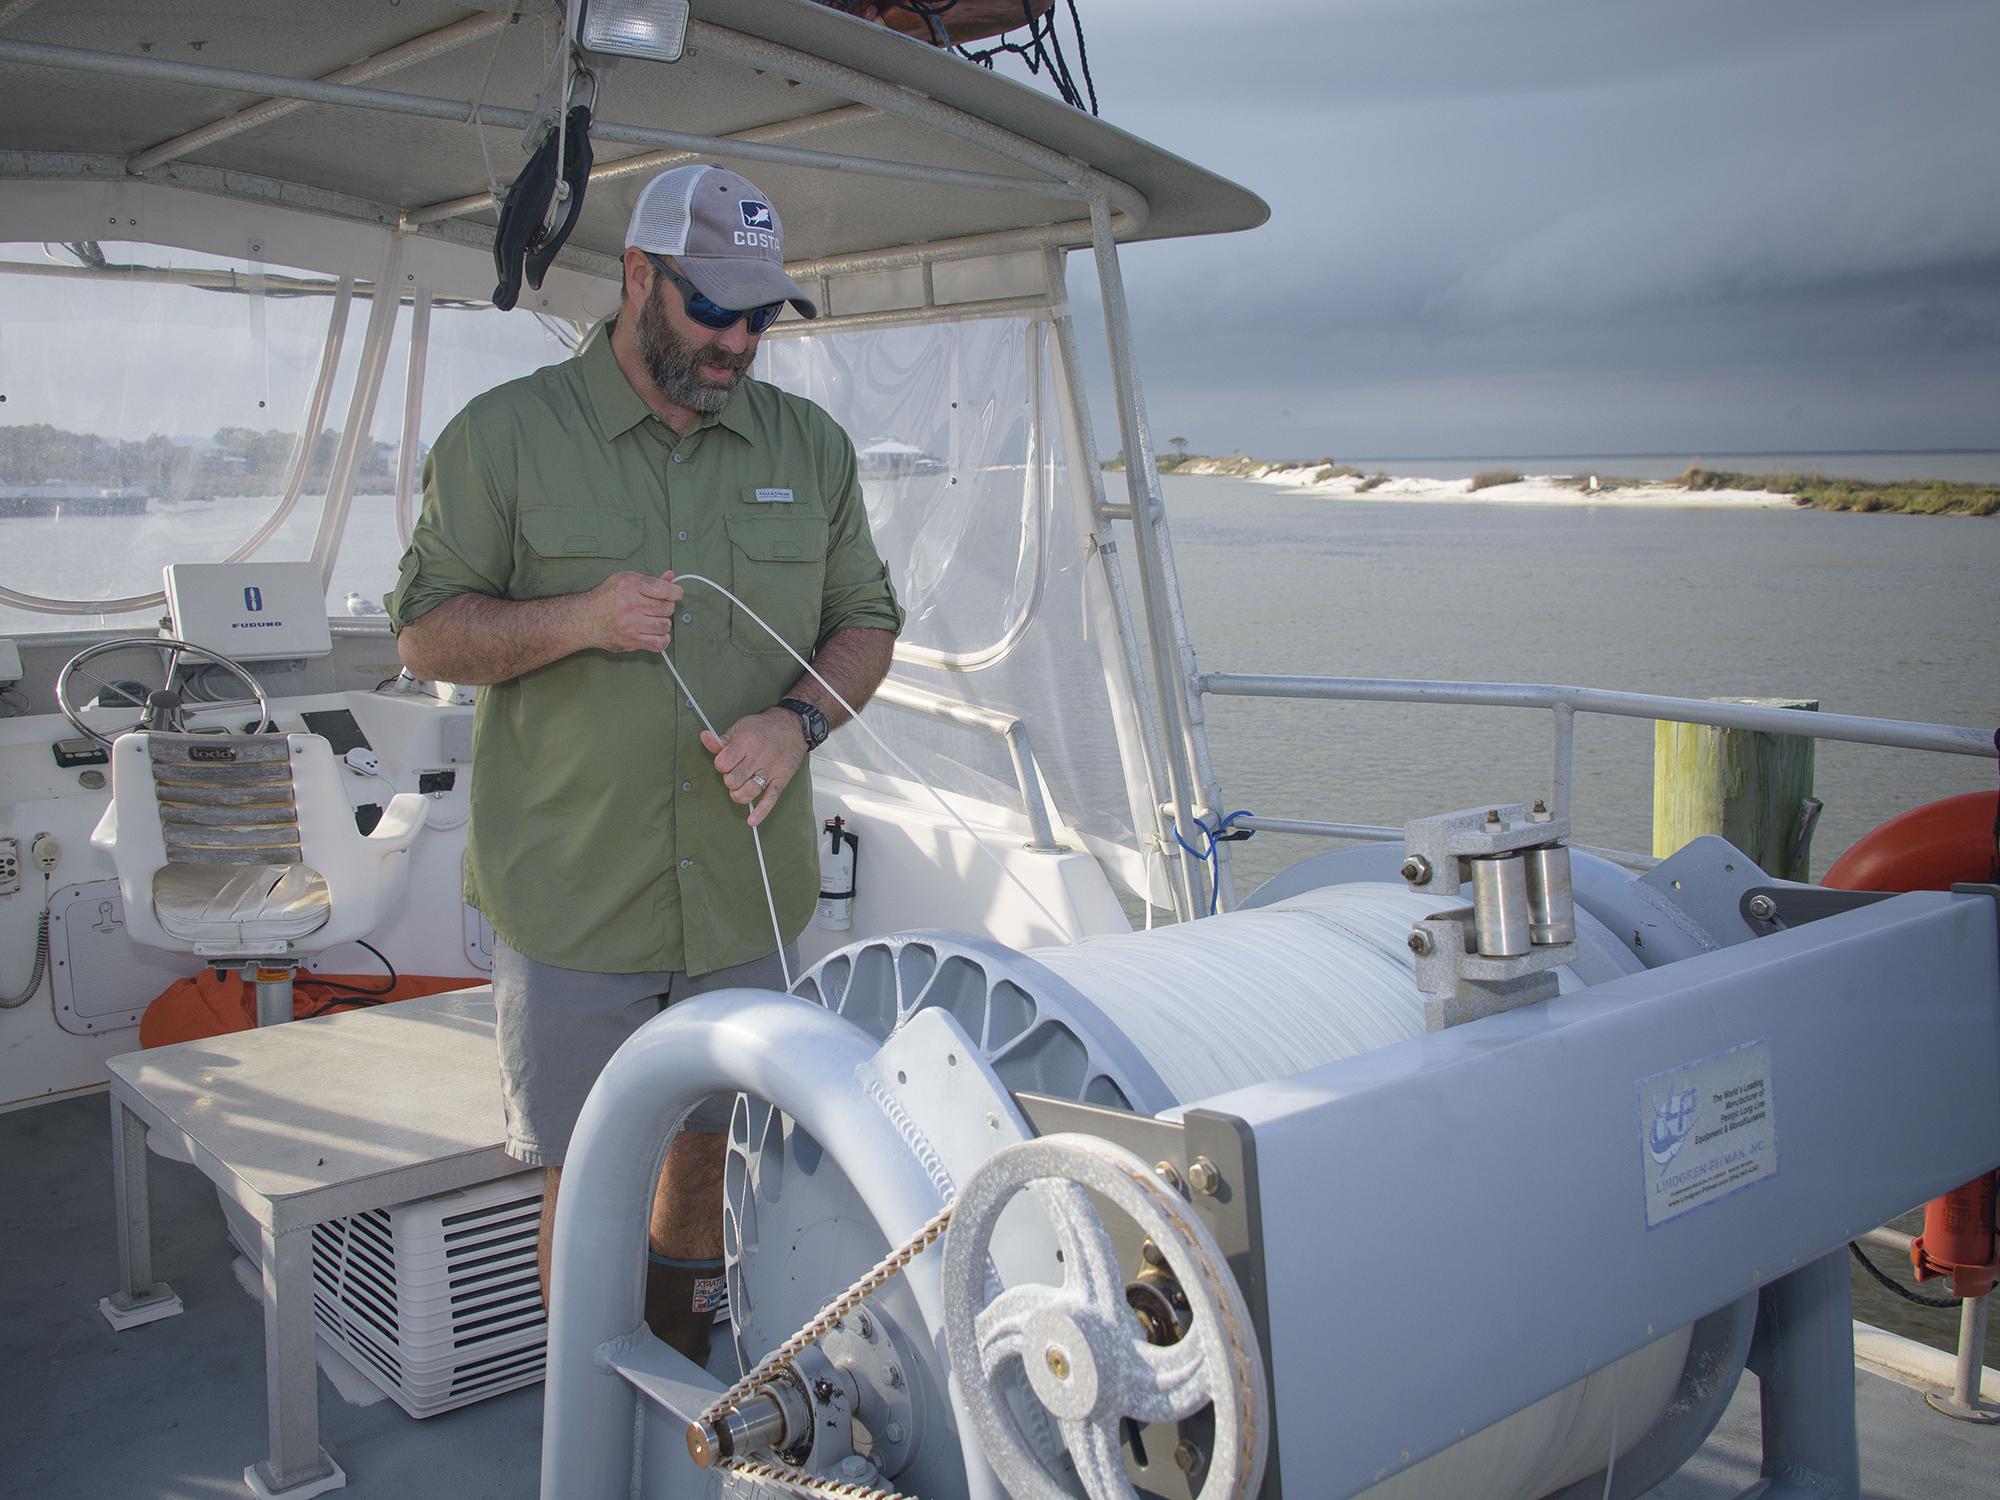 A man stands on a boat and checks a large roll of fishing line.